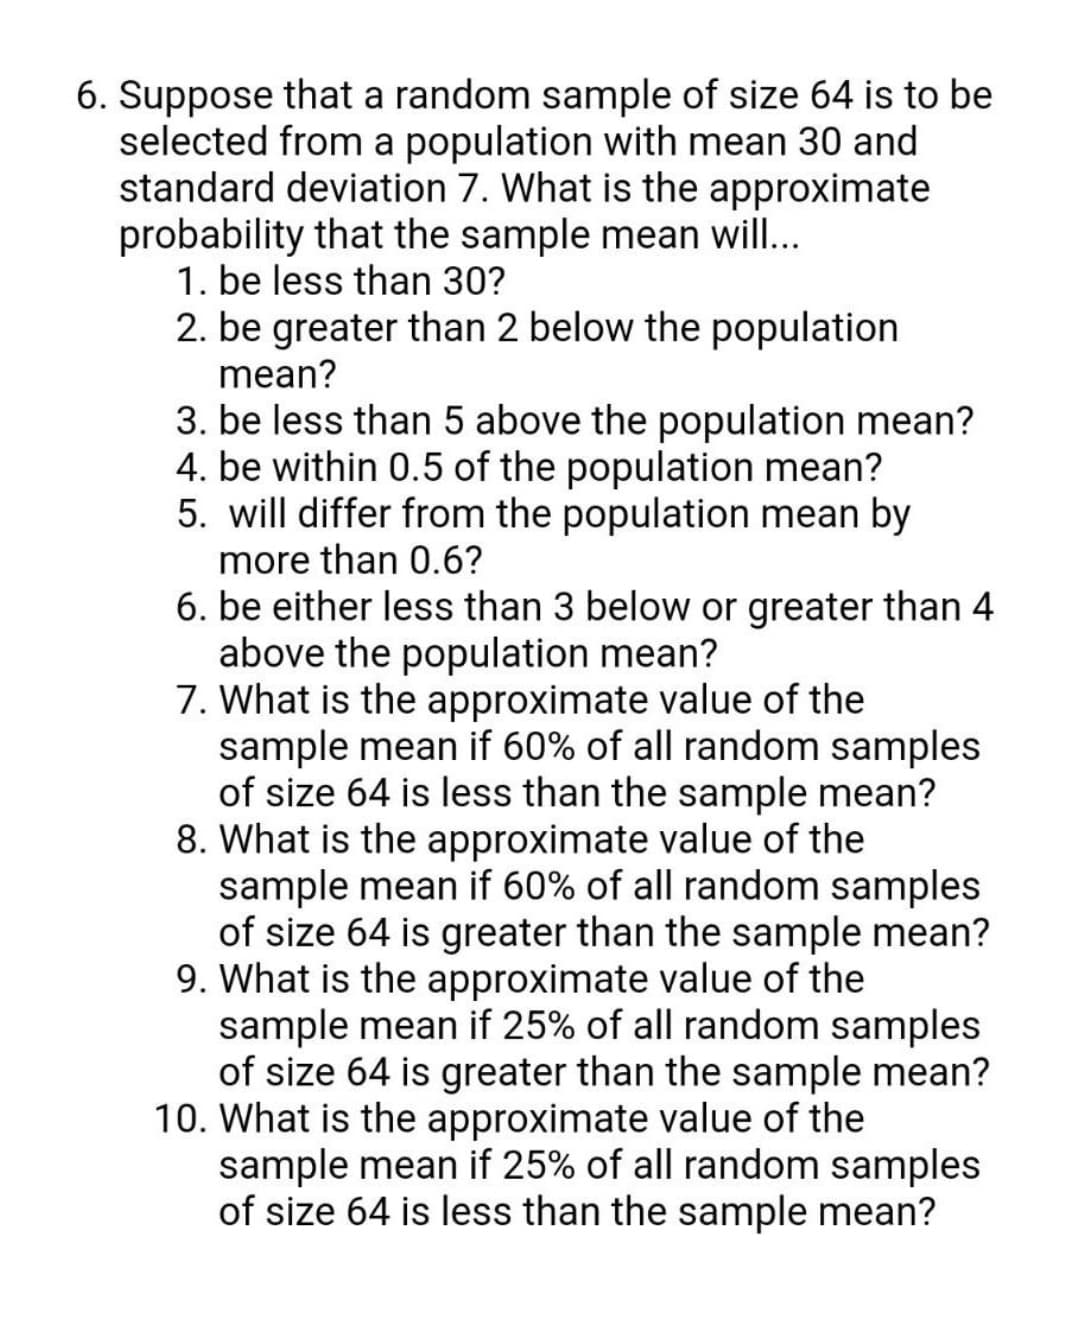 6. Suppose that a random sample of size 64 is to be
selected from a population with mean 30 and
standard deviation 7. What is the approximate
probability that the sample mean will..
1. be less than 30?
2. be greater than 2 below the population
mean?
3. be less than 5 above the population mean?
4. be within 0.5 of the population mean?
5. will differ from the population mean by
more than 0.6?
6. be either less than 3 below or greater than 4
above the population mean?
7. What is the approximate value of the
sample mean if 60% of all random samples
of size 64 is less than the sample mean?
8. What is the approximate value of the
sample mean if 60% of all random samples
of size 64 is greater than the sample mean?
9. What is the approximate value of the
sample mean if 25% of all random samples
of size 64 is greater than the sample mean?
10. What is the approximate value of the
sample mean if 25% of all random samples
of size 64 is less than the sample mean?
